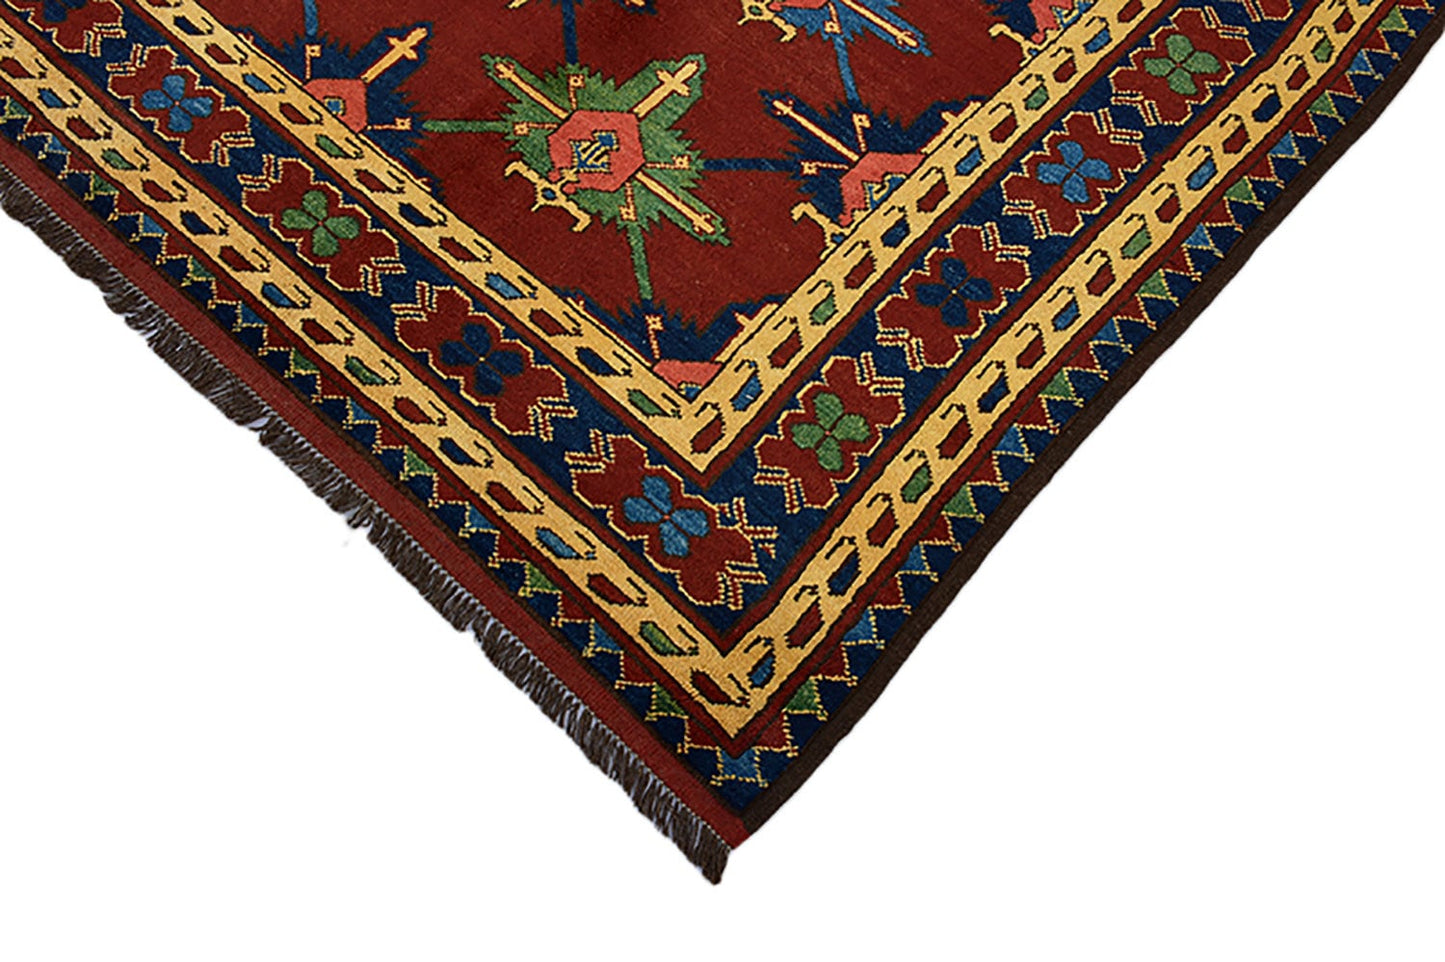 Red Vintage 7x10 Geometric Floral Rug | Red Blue Green Flowers | Wool Hand Knotted Rug | Turkish Persian Rug